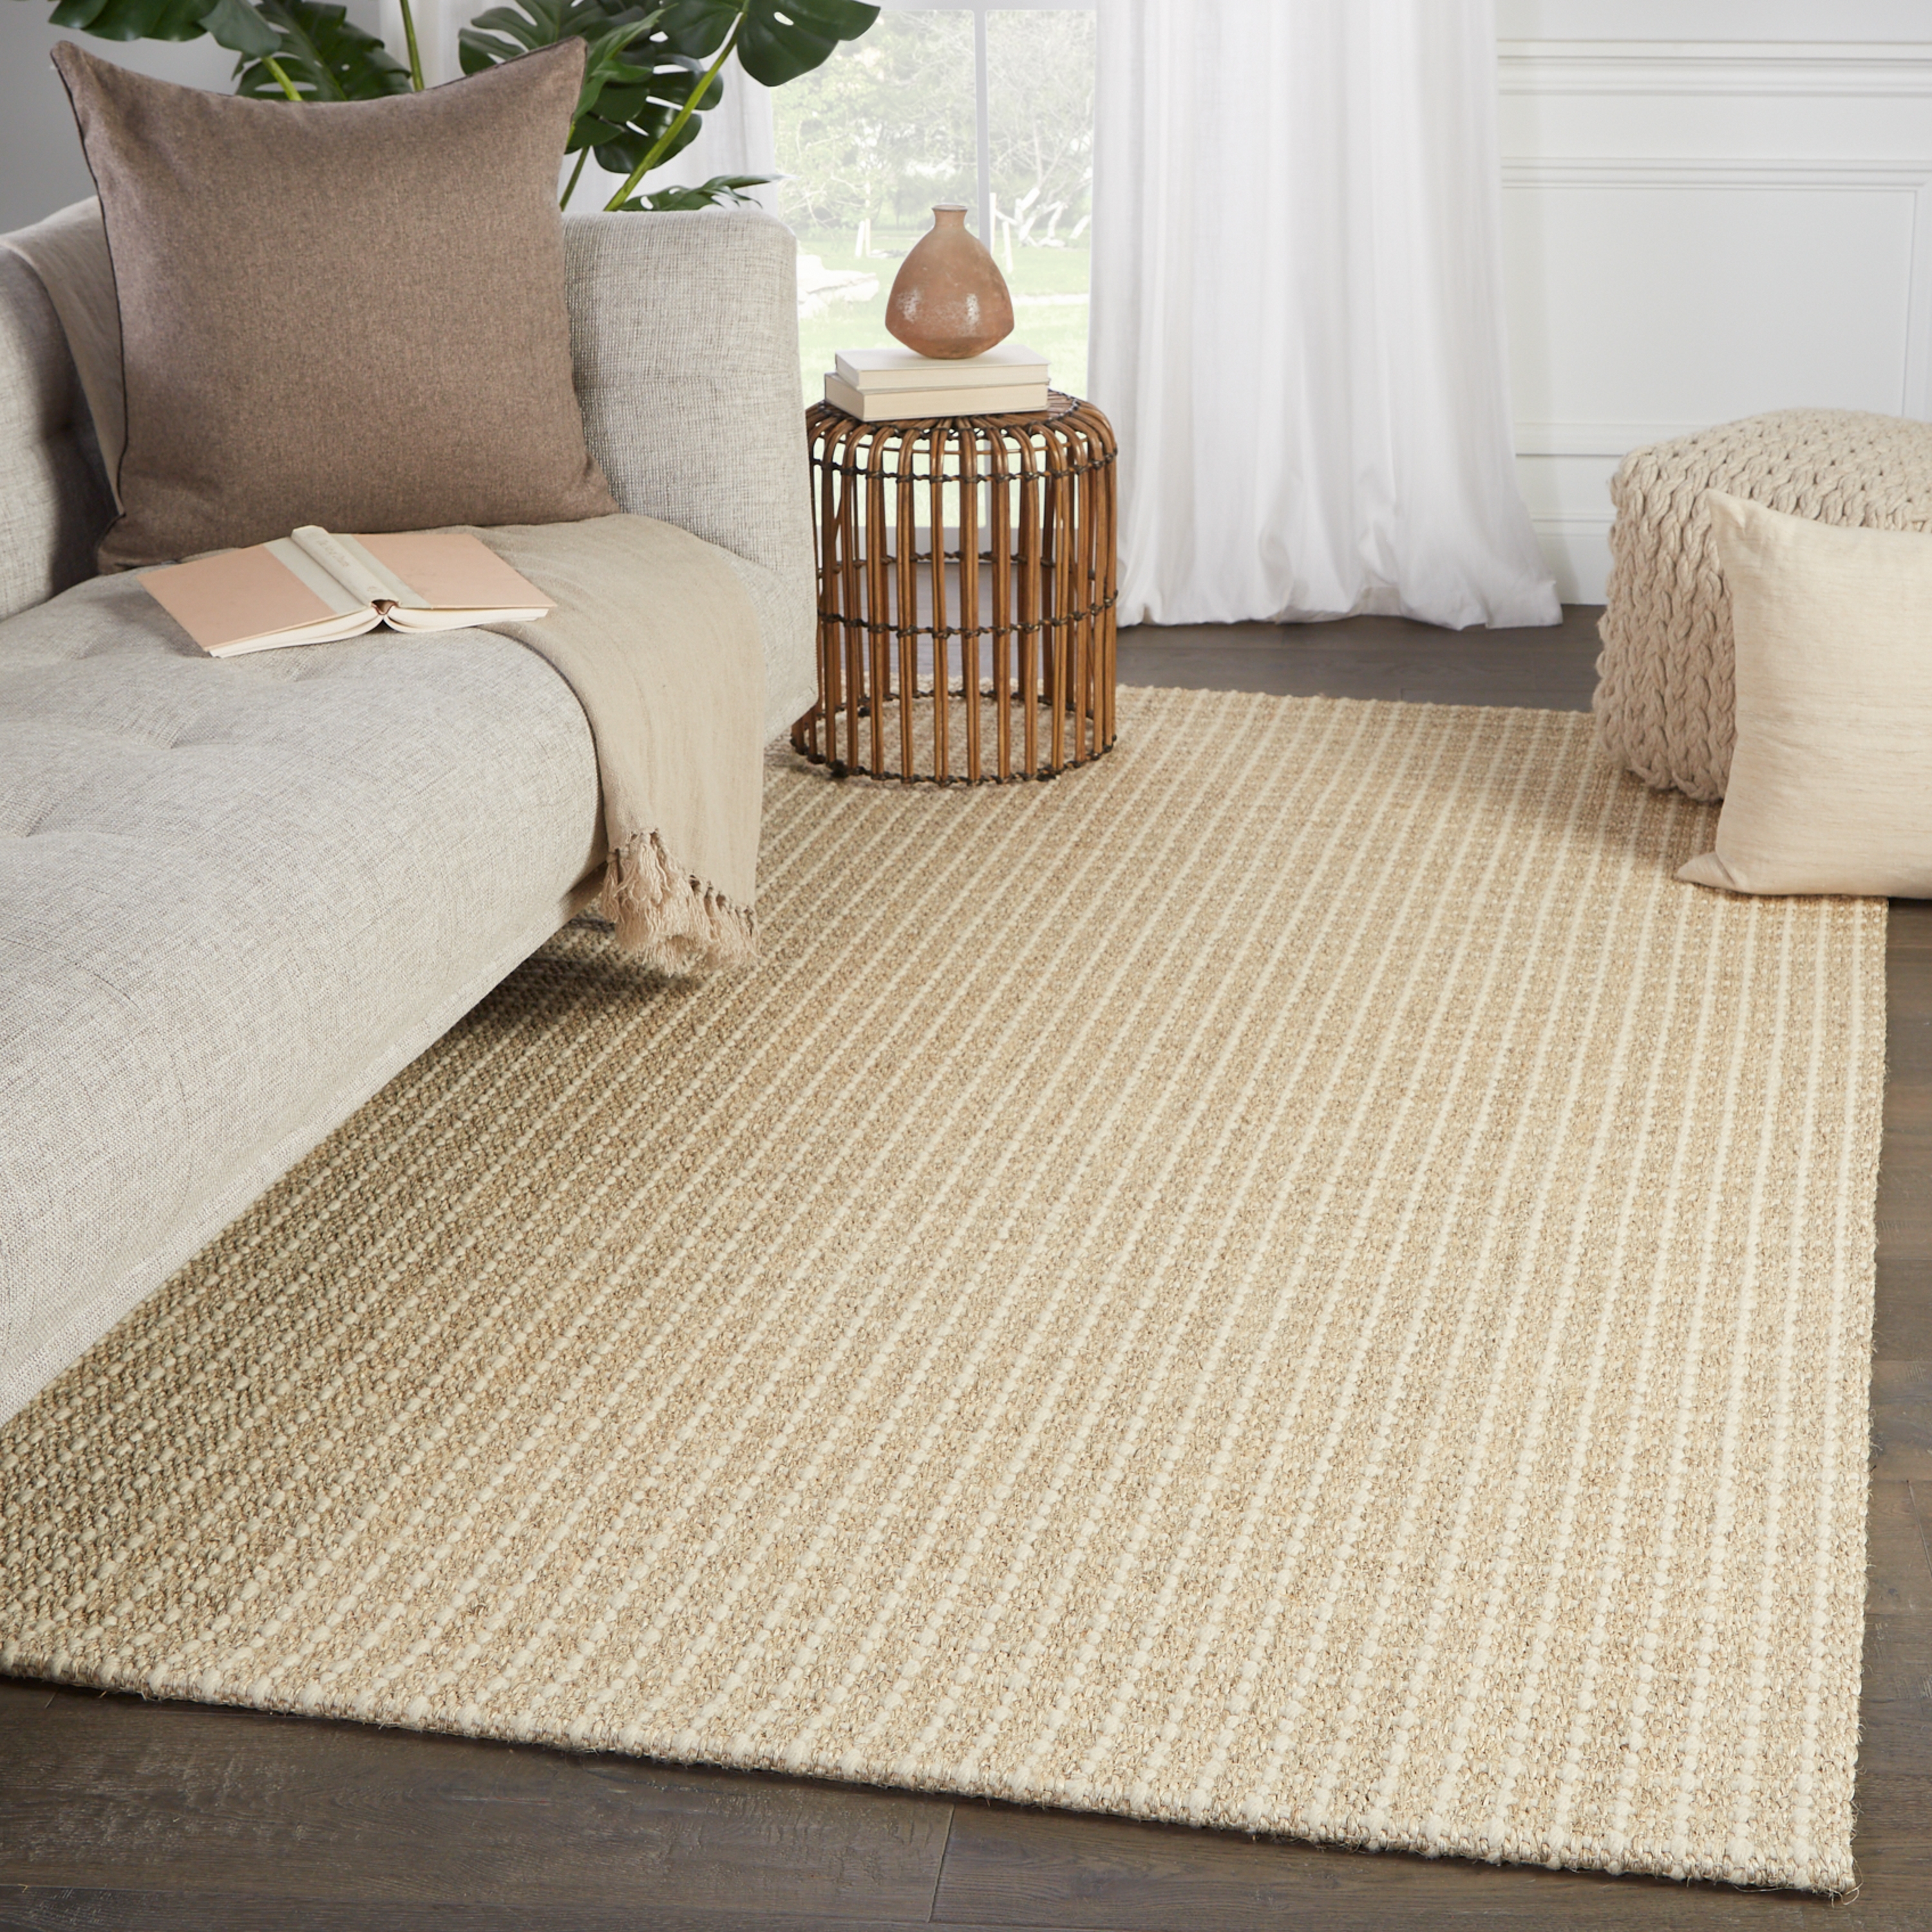 Tane Natural Solid Beige/ Ivory Area Rug (10'X14') - Image 4